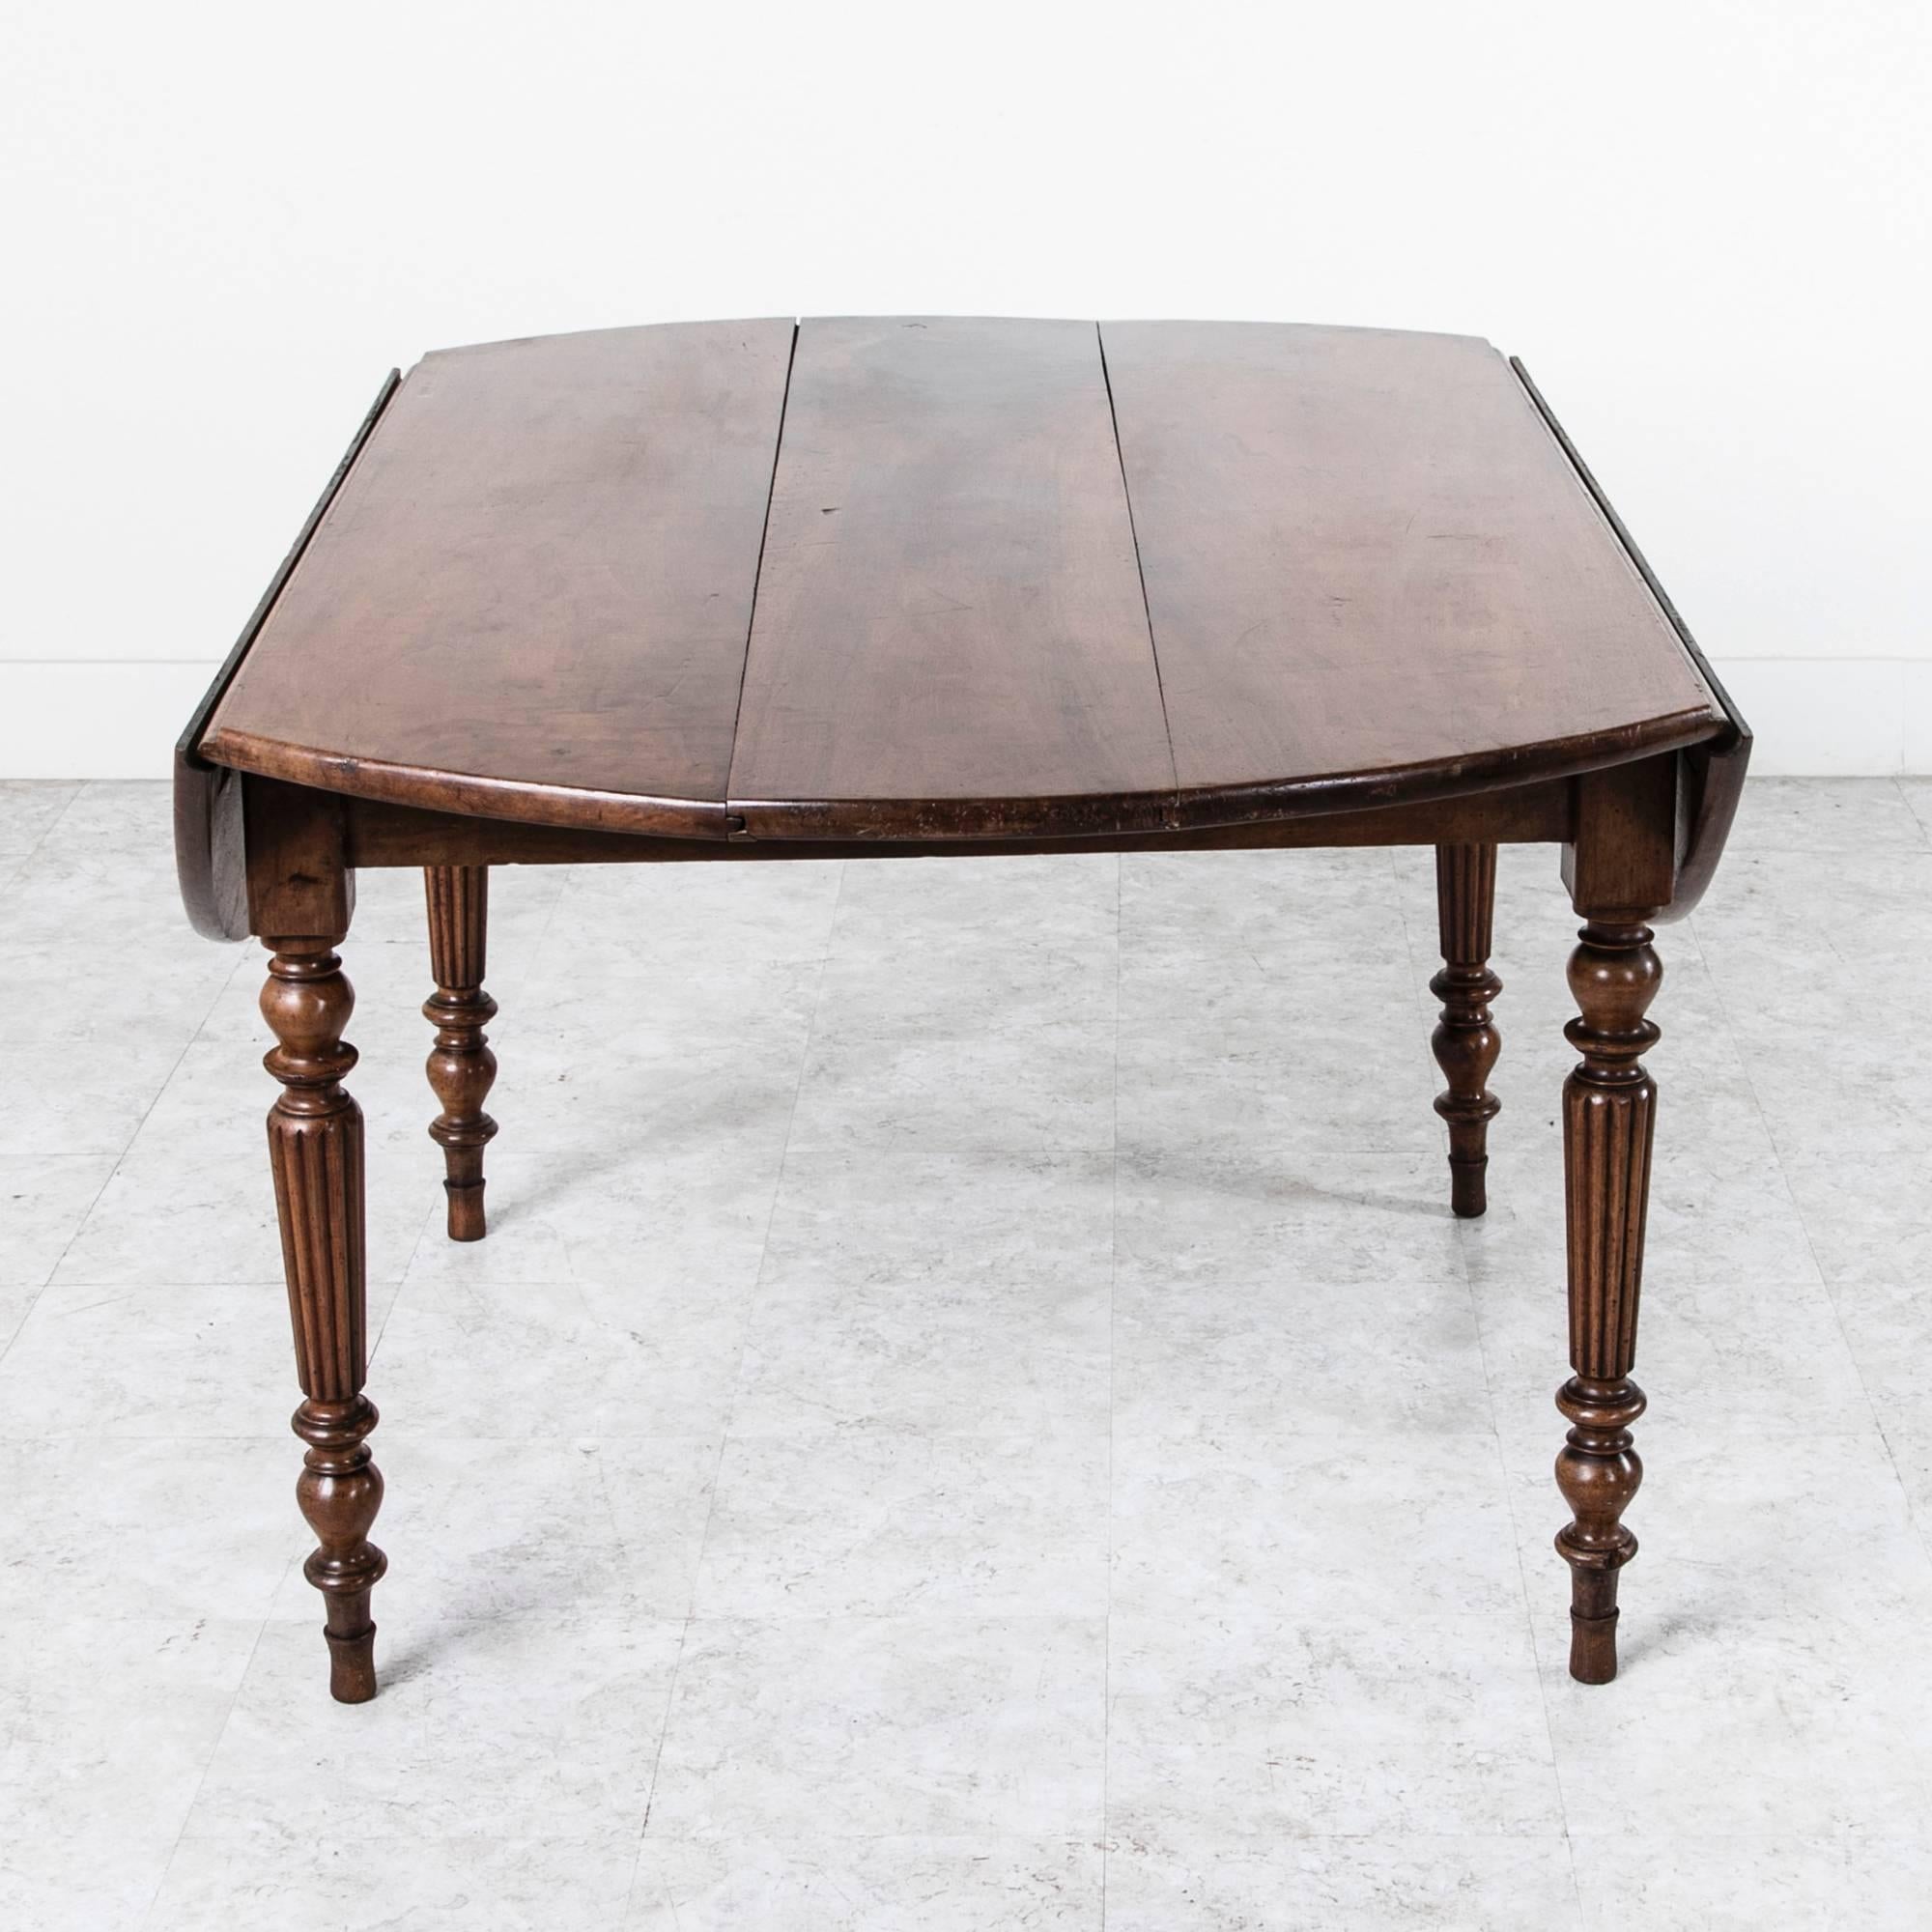 This elegant dining table features narrow turned and fluted solid walnut legs. Created in early 19th century France, this piece's style and construction have stood the test of time. It will sit six comfortably for dining and conversation while